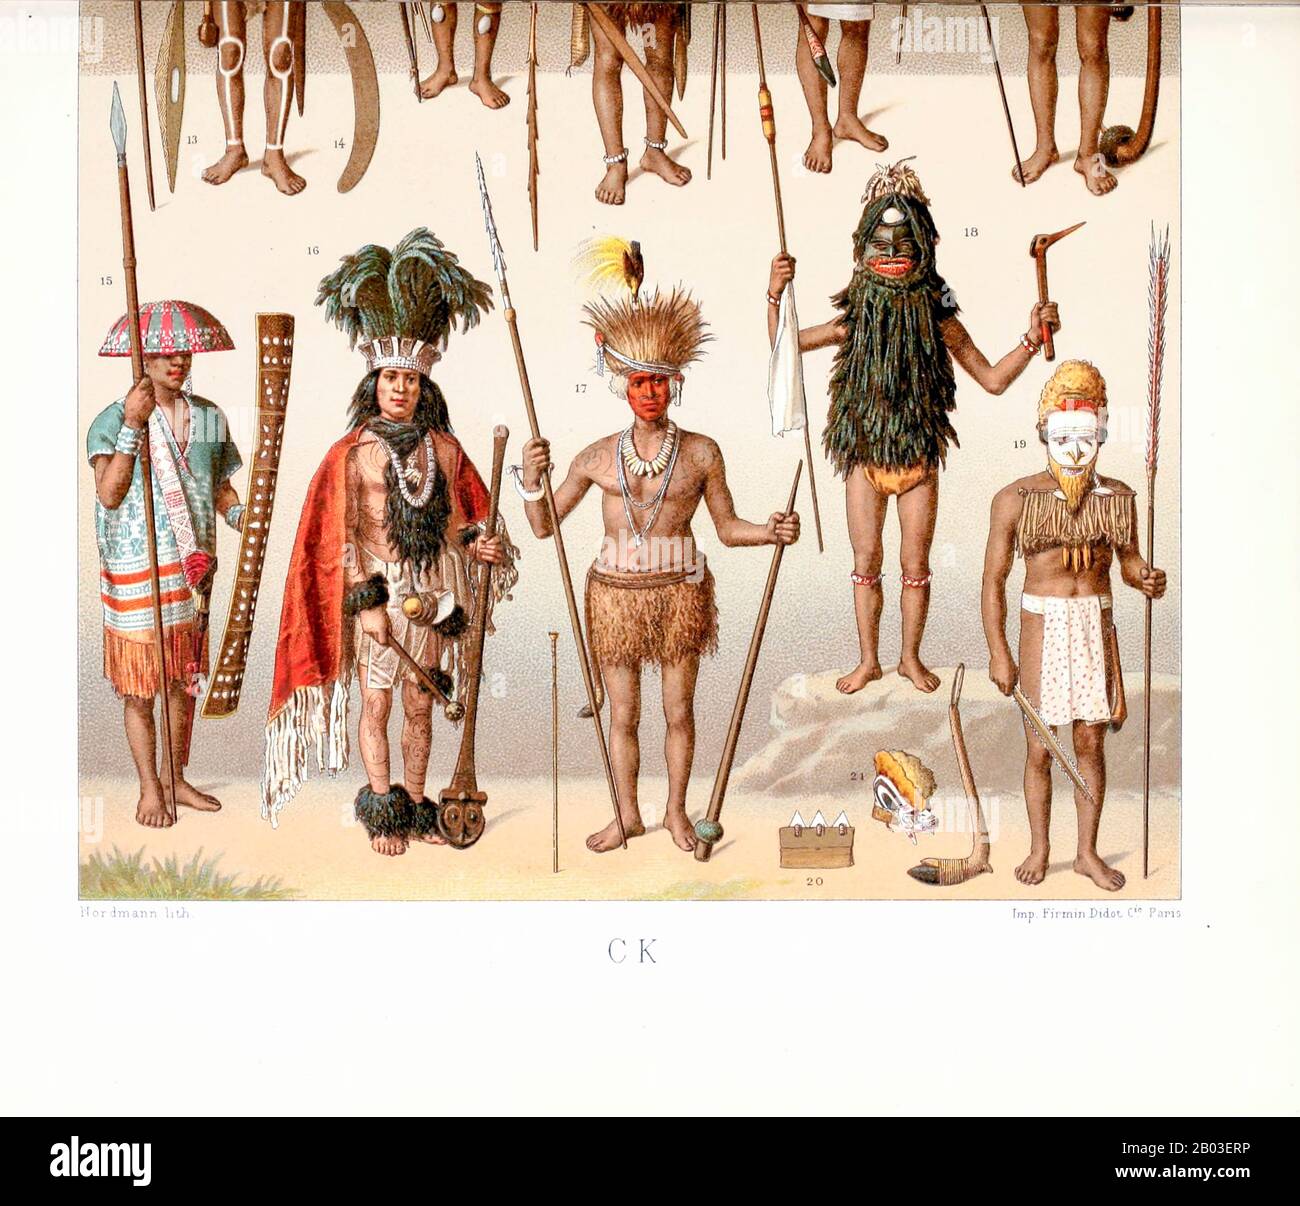 Ancient Oceania fashion and accessories from Geschichte des kostüms in chronologischer entwicklung (History of the costume in chronological development) by Racinet, A. (Auguste), 1825-1893. and Rosenberg, Adolf, 1850-1906, Volume 1 printed in Berlin in 1888 Stock Photo